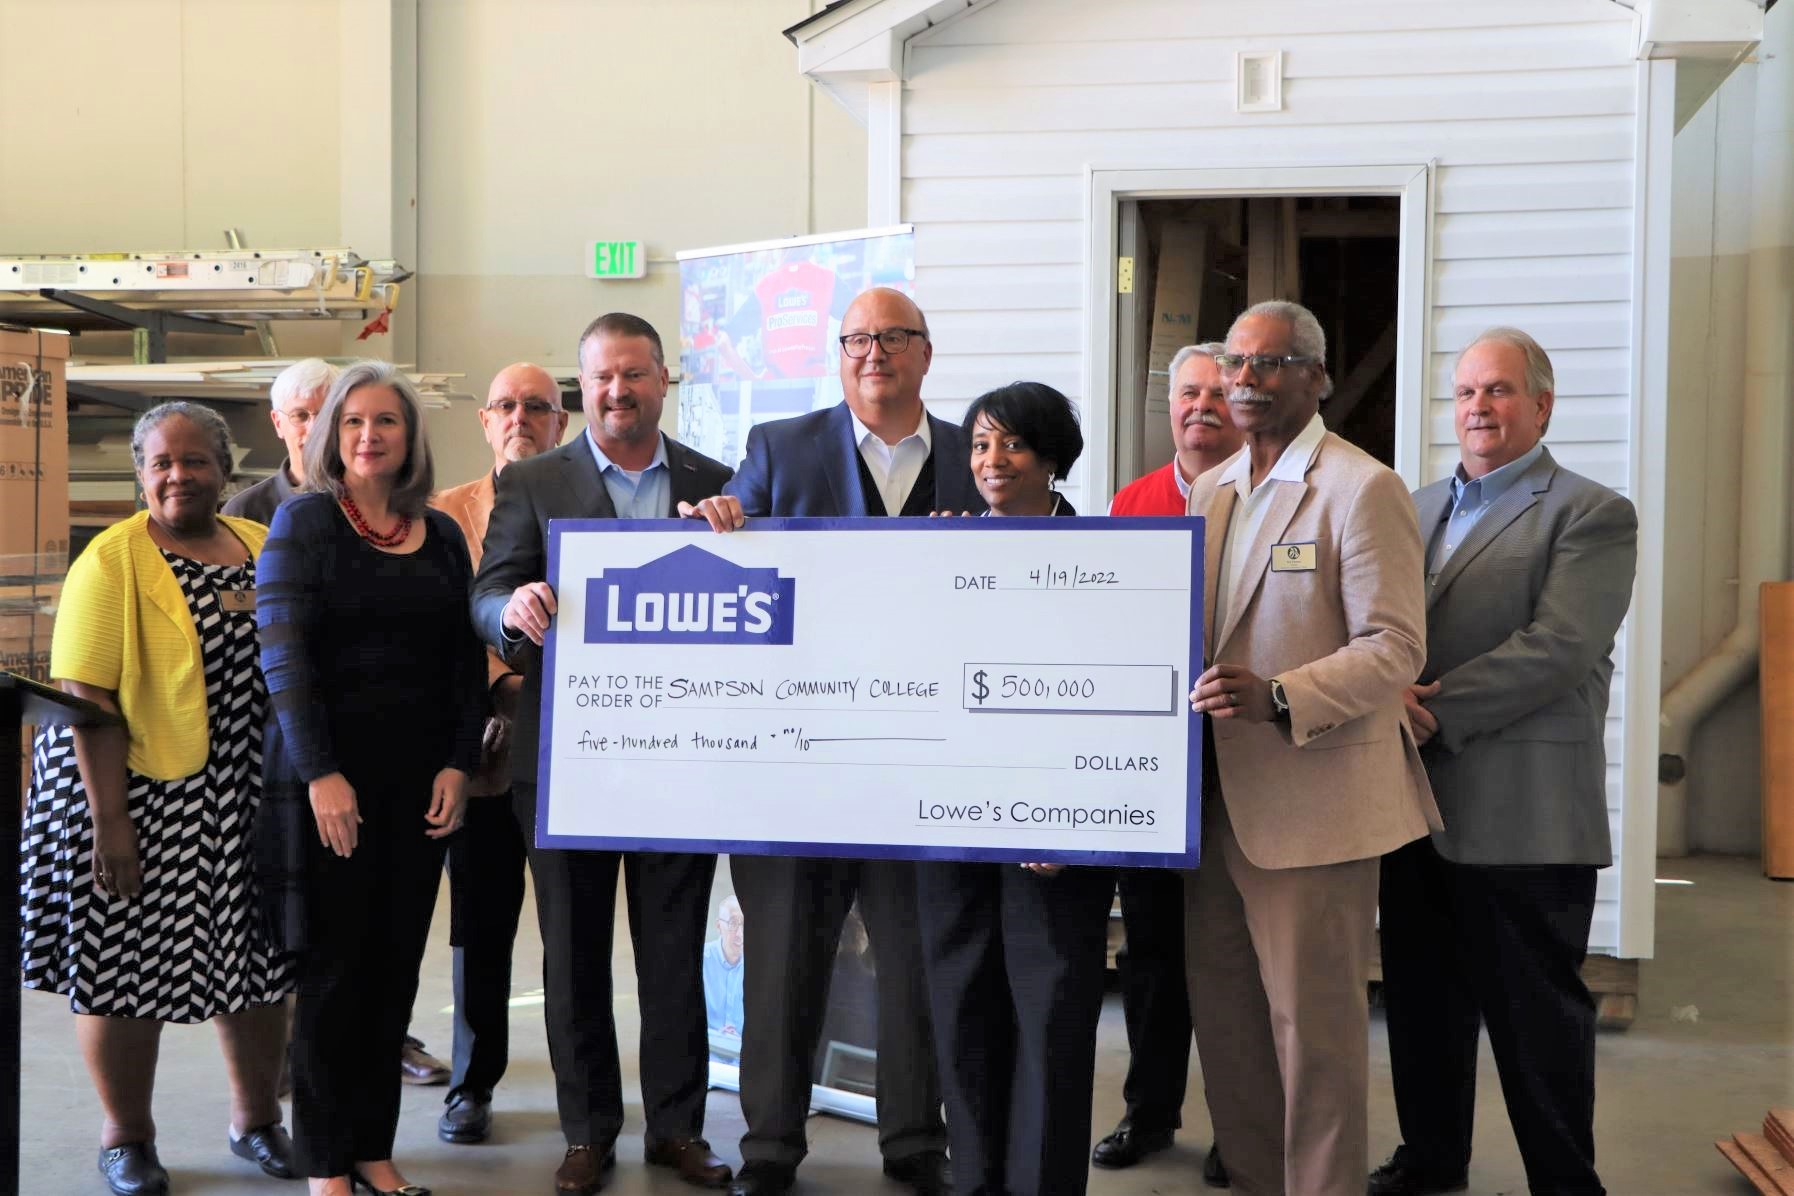 Sampson Community College Partners with Lowe’s